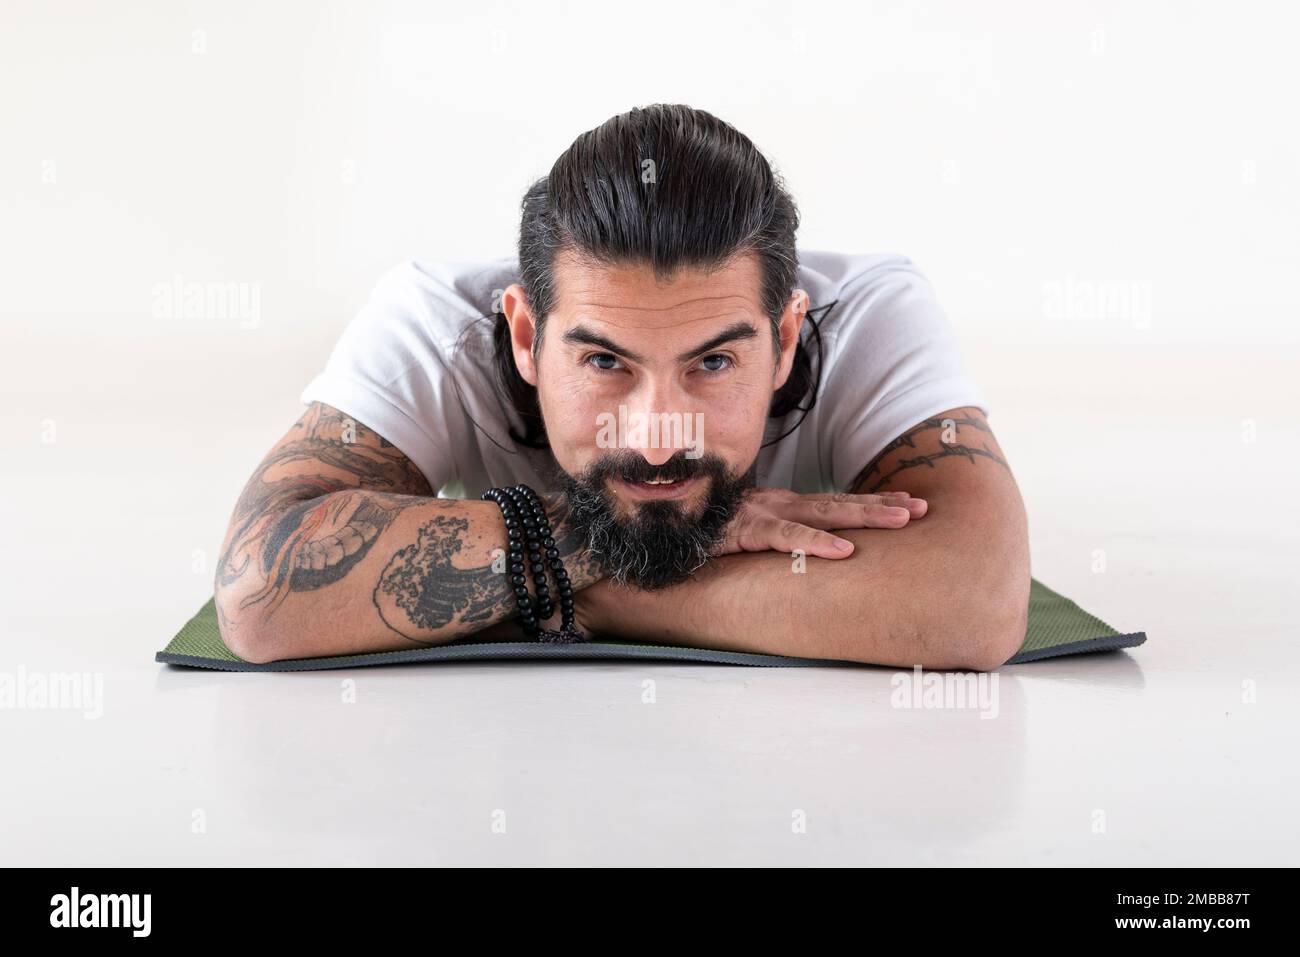 Portrait of a man dressed in white yoga clothes lying on a mat while looking at camera over white background. Studio shot. Stock Photo